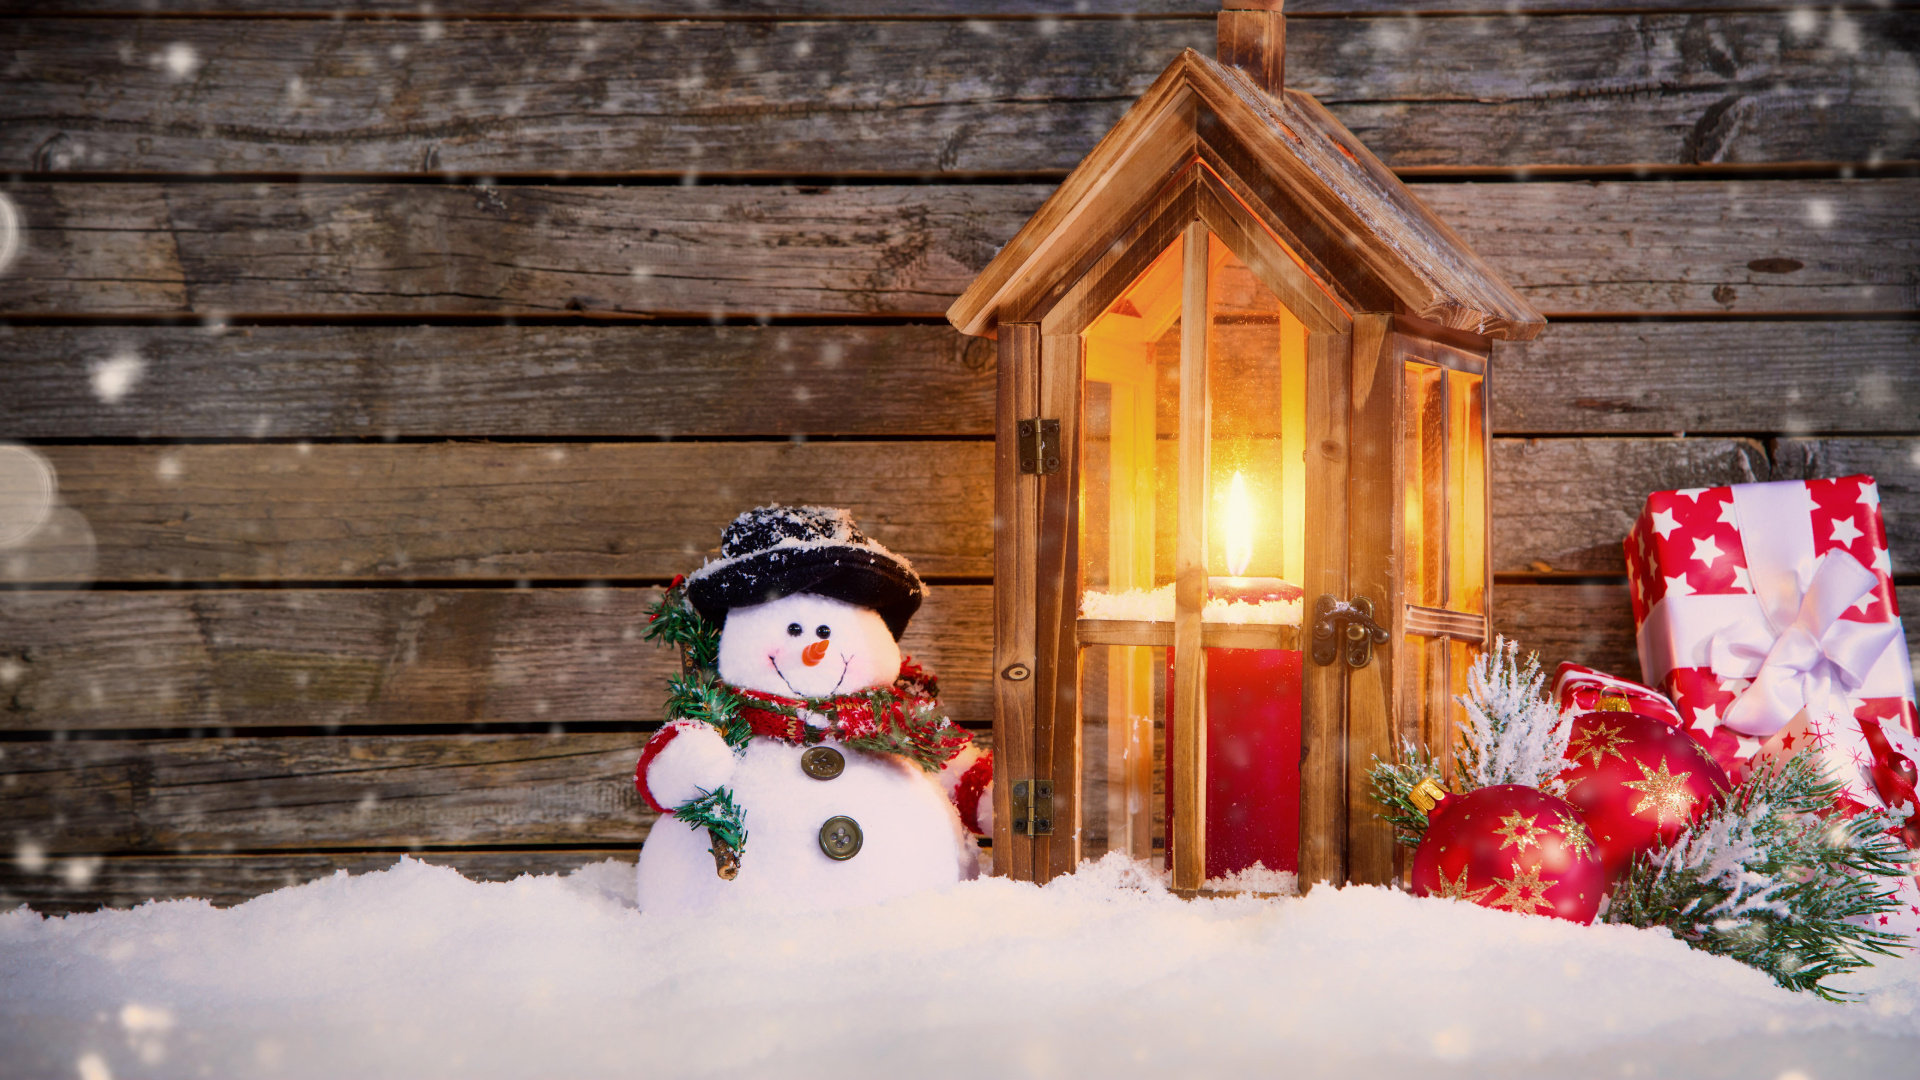 Christmas Day, Snowman, Christmas Decoration, Christmas Ornament, Snow. Wallpaper in 1920x1080 Resolution